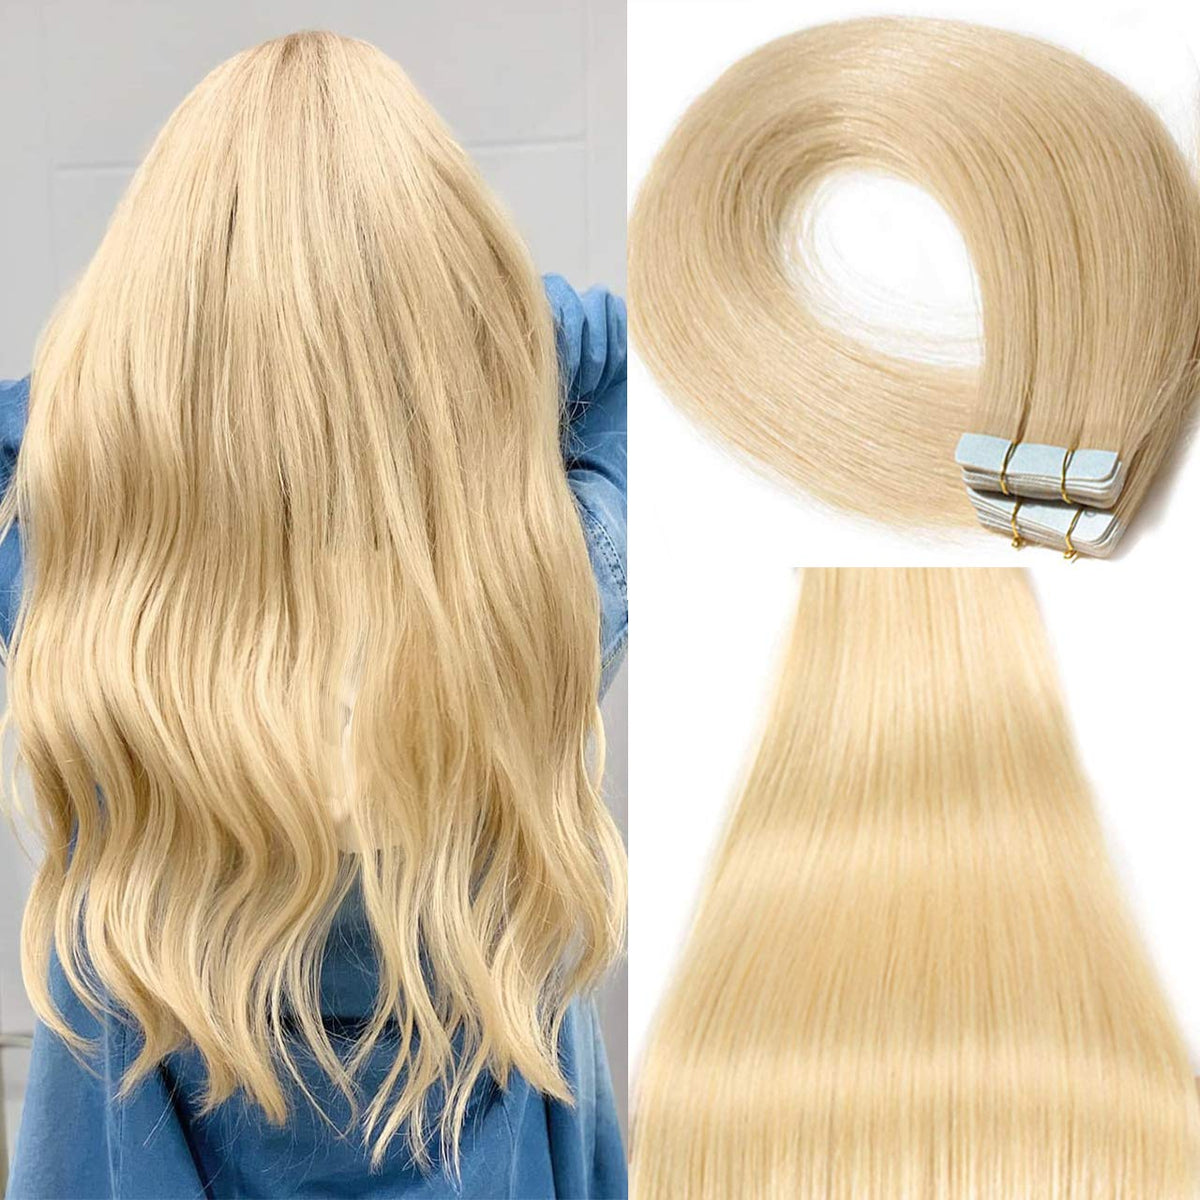 Remy Tape in Human Hair Extensions Natural PU Skin Weft Real Human Hair #22 Medium Blonde